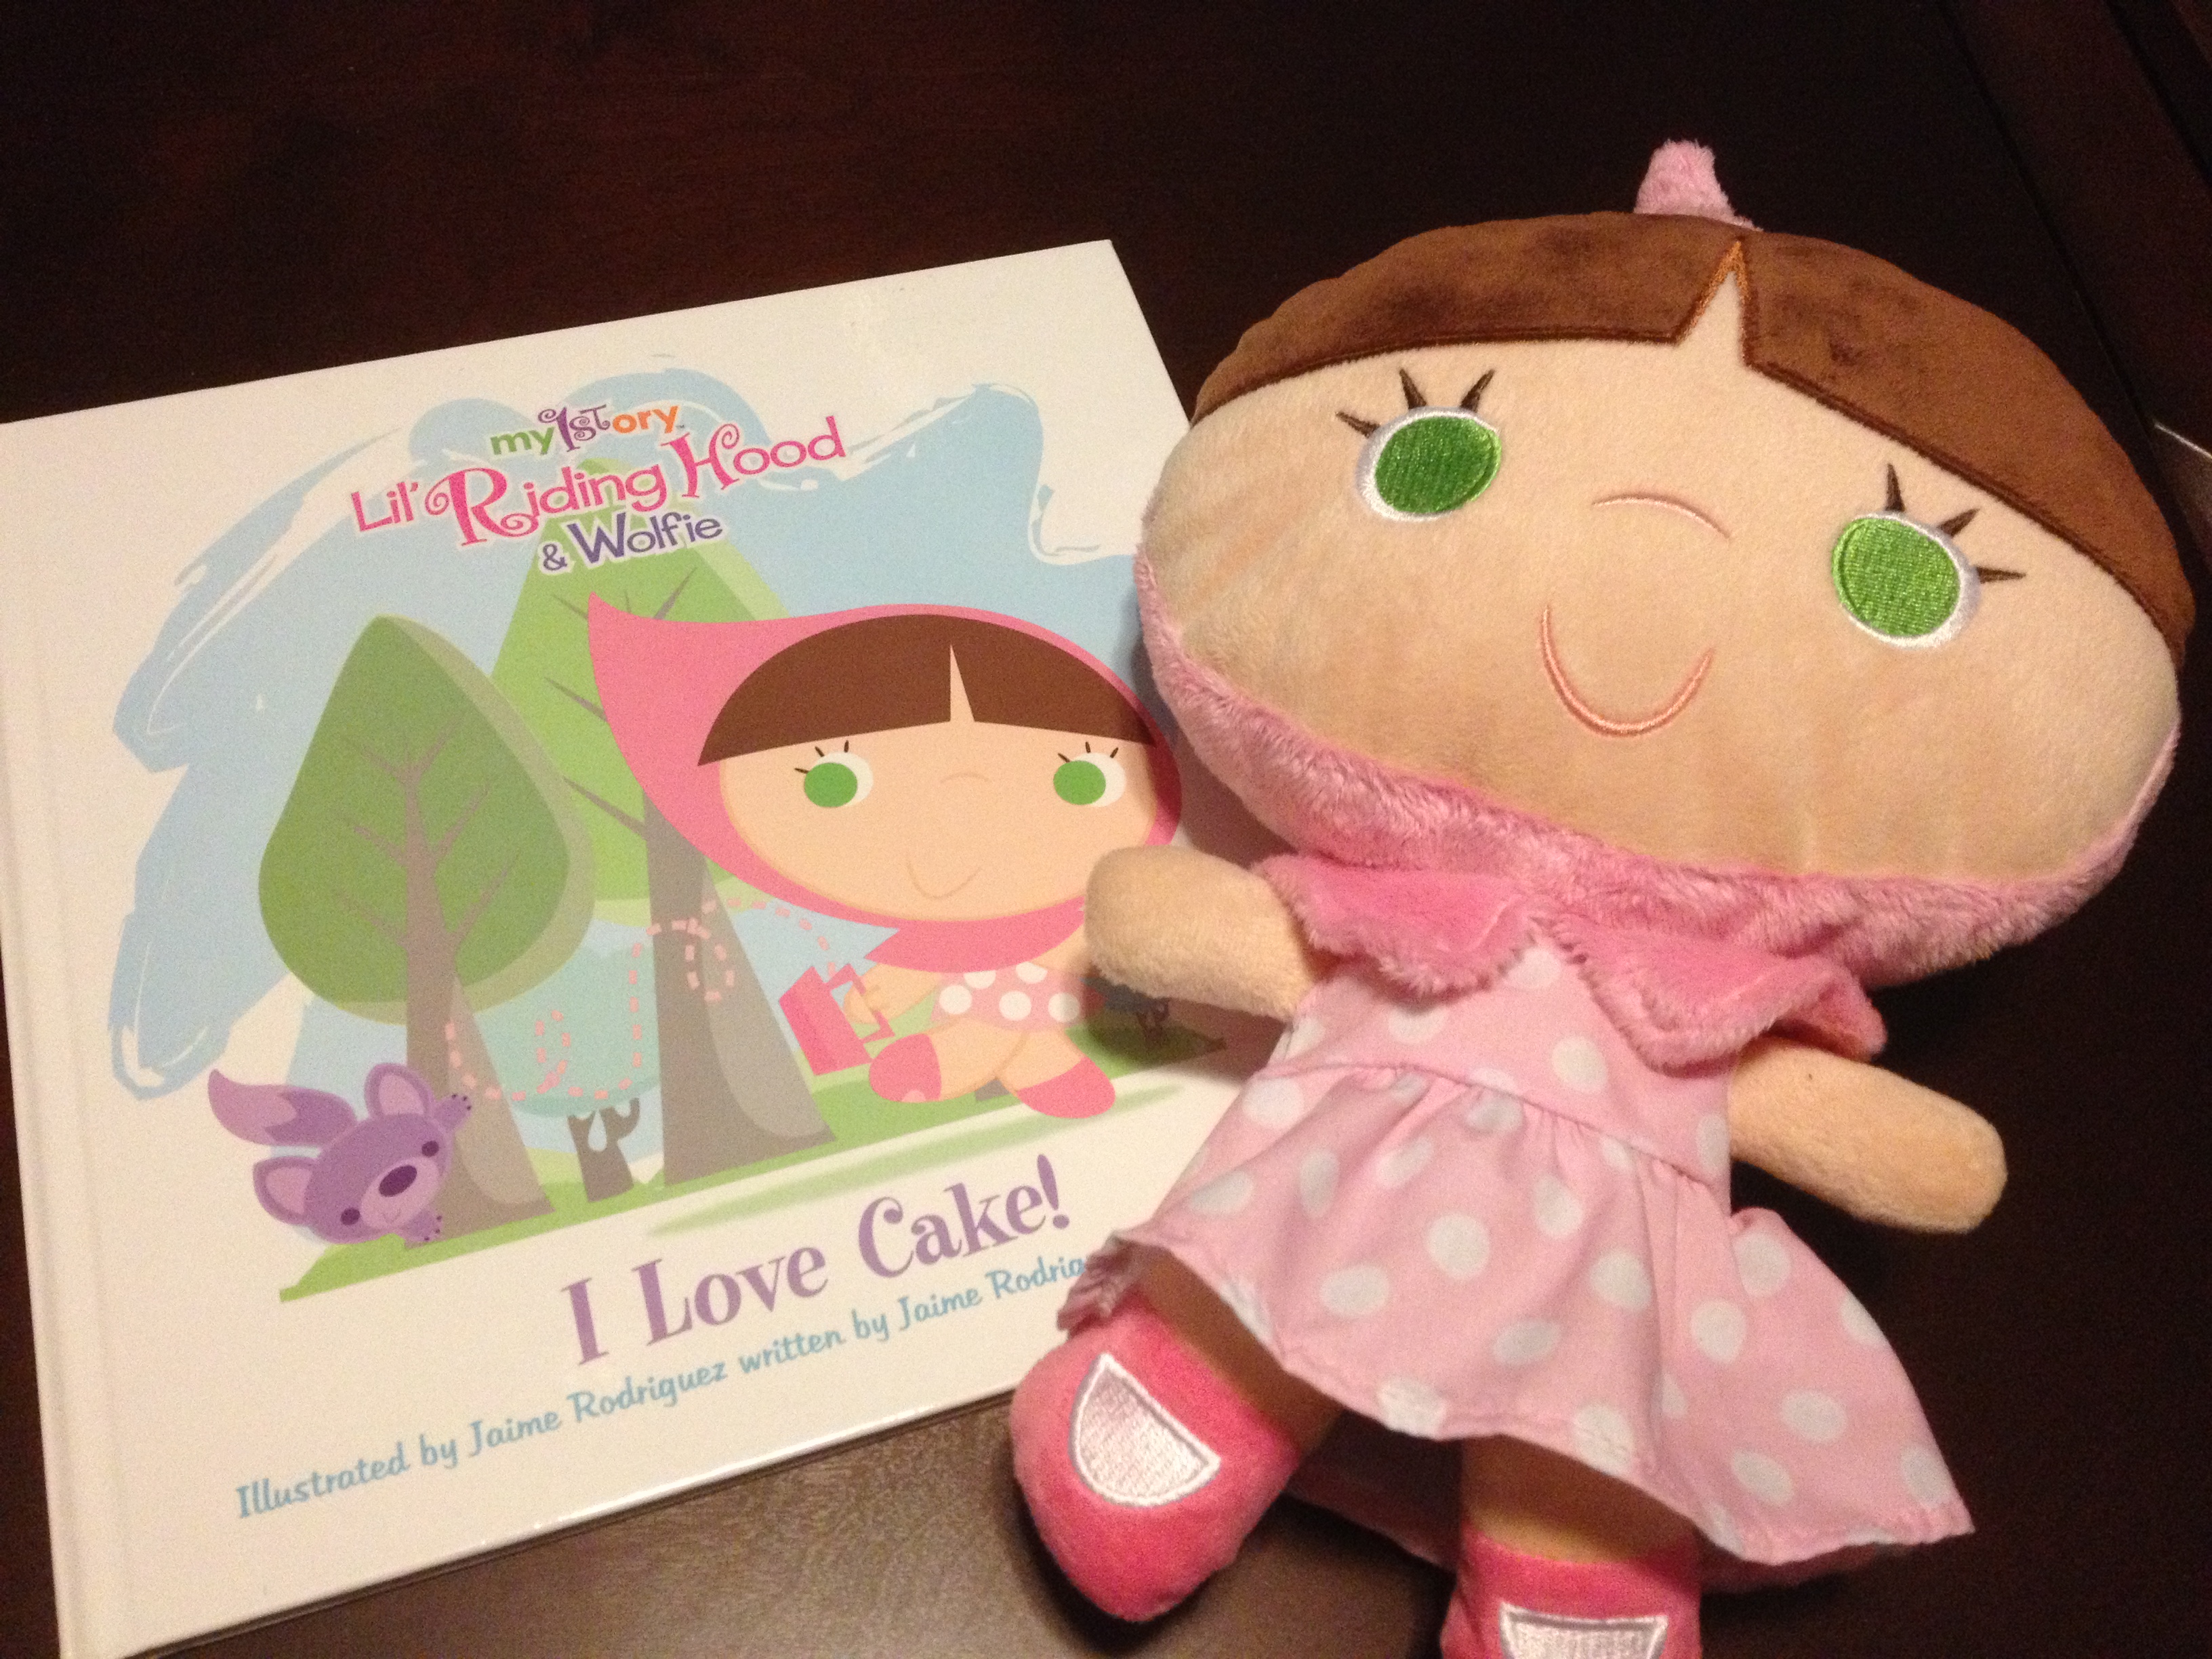 Give it Forward: My1story Lil’ Riding Hood Plush and Storybook